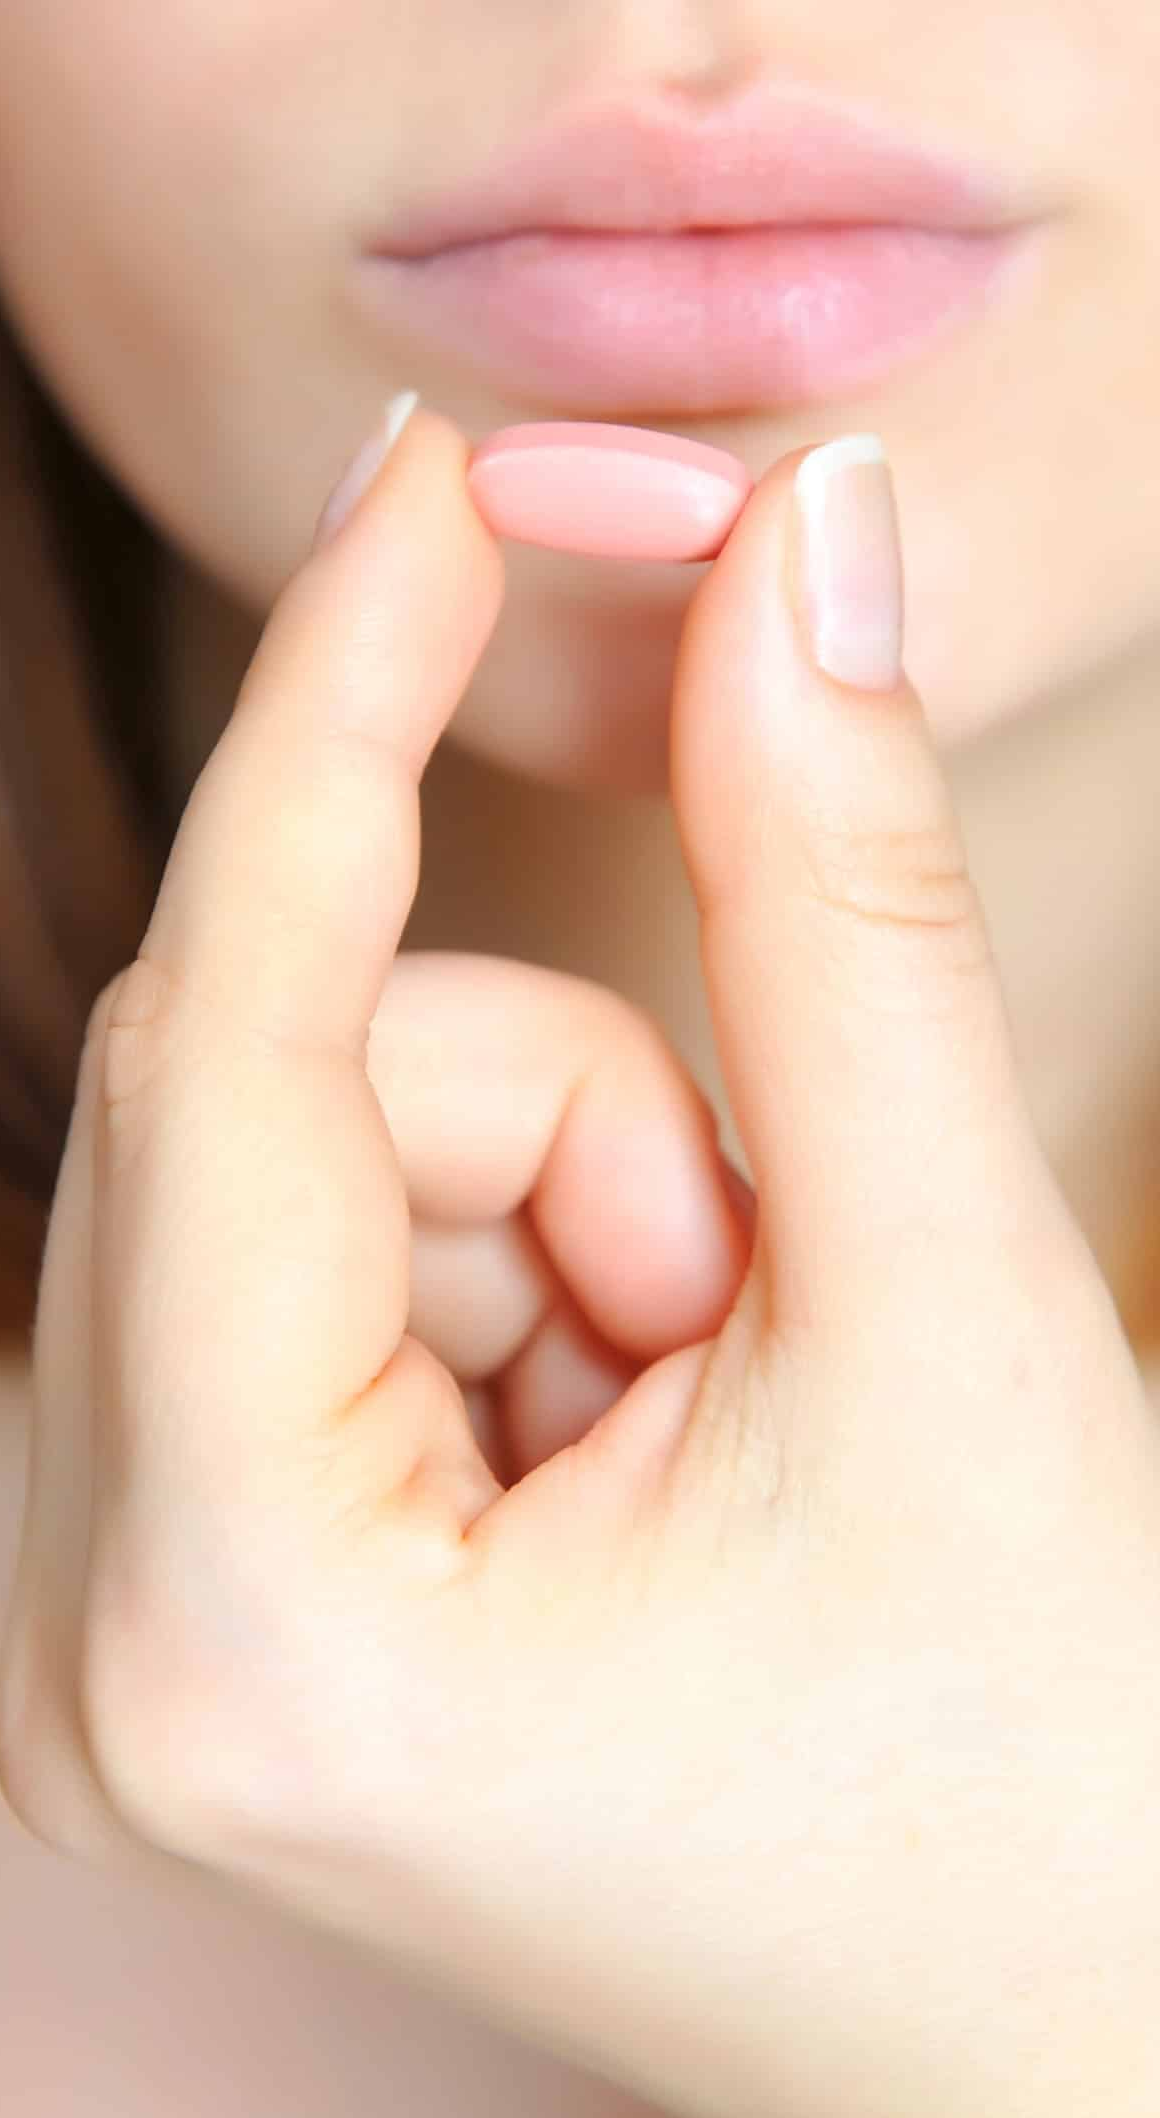 Close-up of a sexual health expert's fingers forming a silent gesture next to their lips.